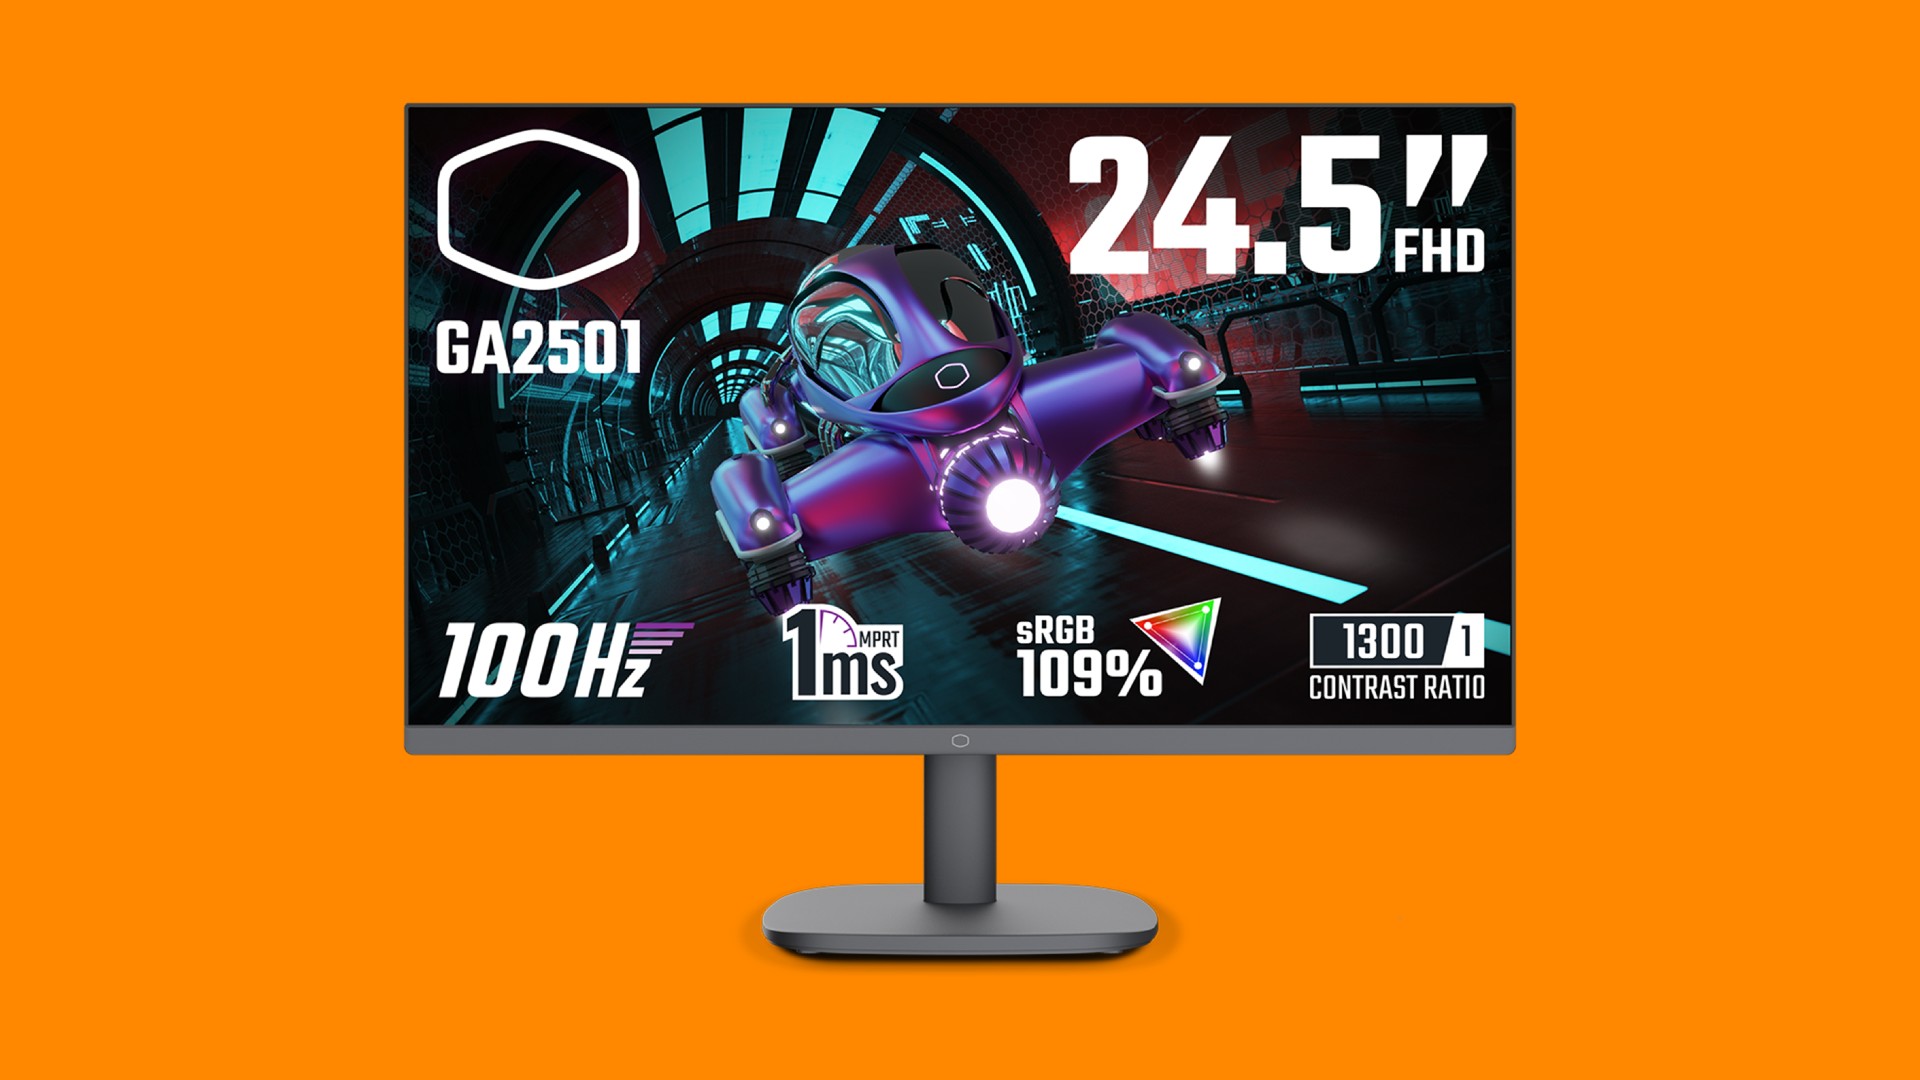 New Cooler Master gaming monitor is ultra budget, still hits 100Hz